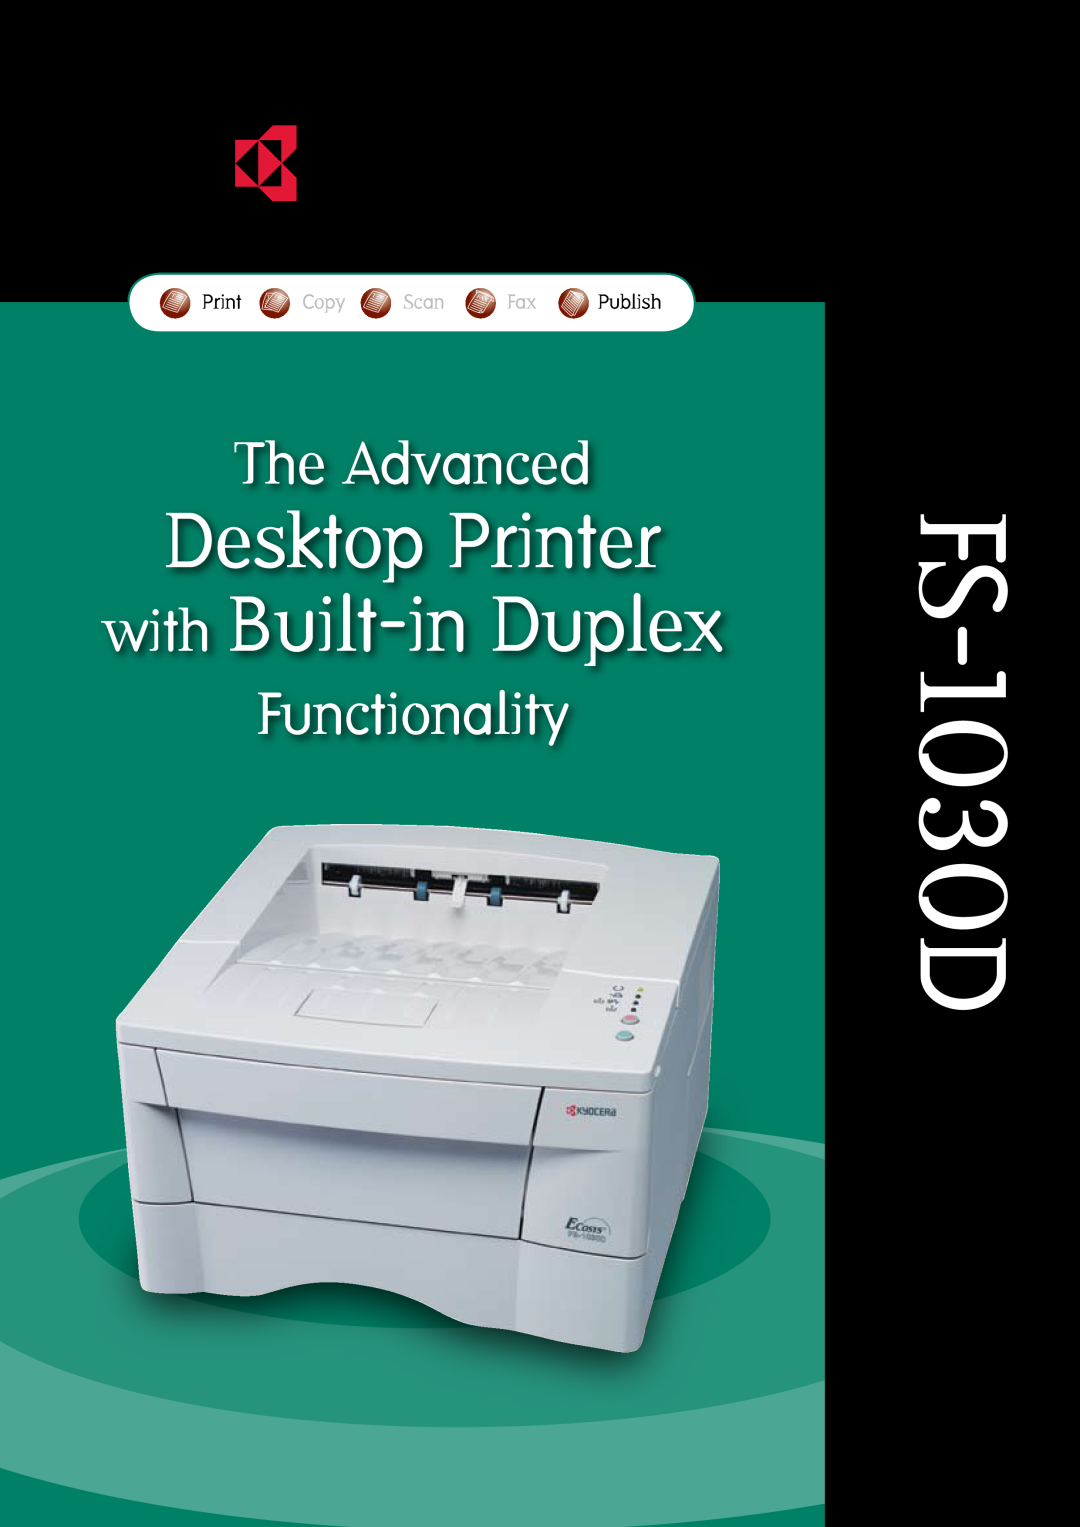 Kyocera FS-1030D manual Desktop Printer with Built-in Duplex, The Advanced, Functionality, Print Copy Scan Fax Publish 